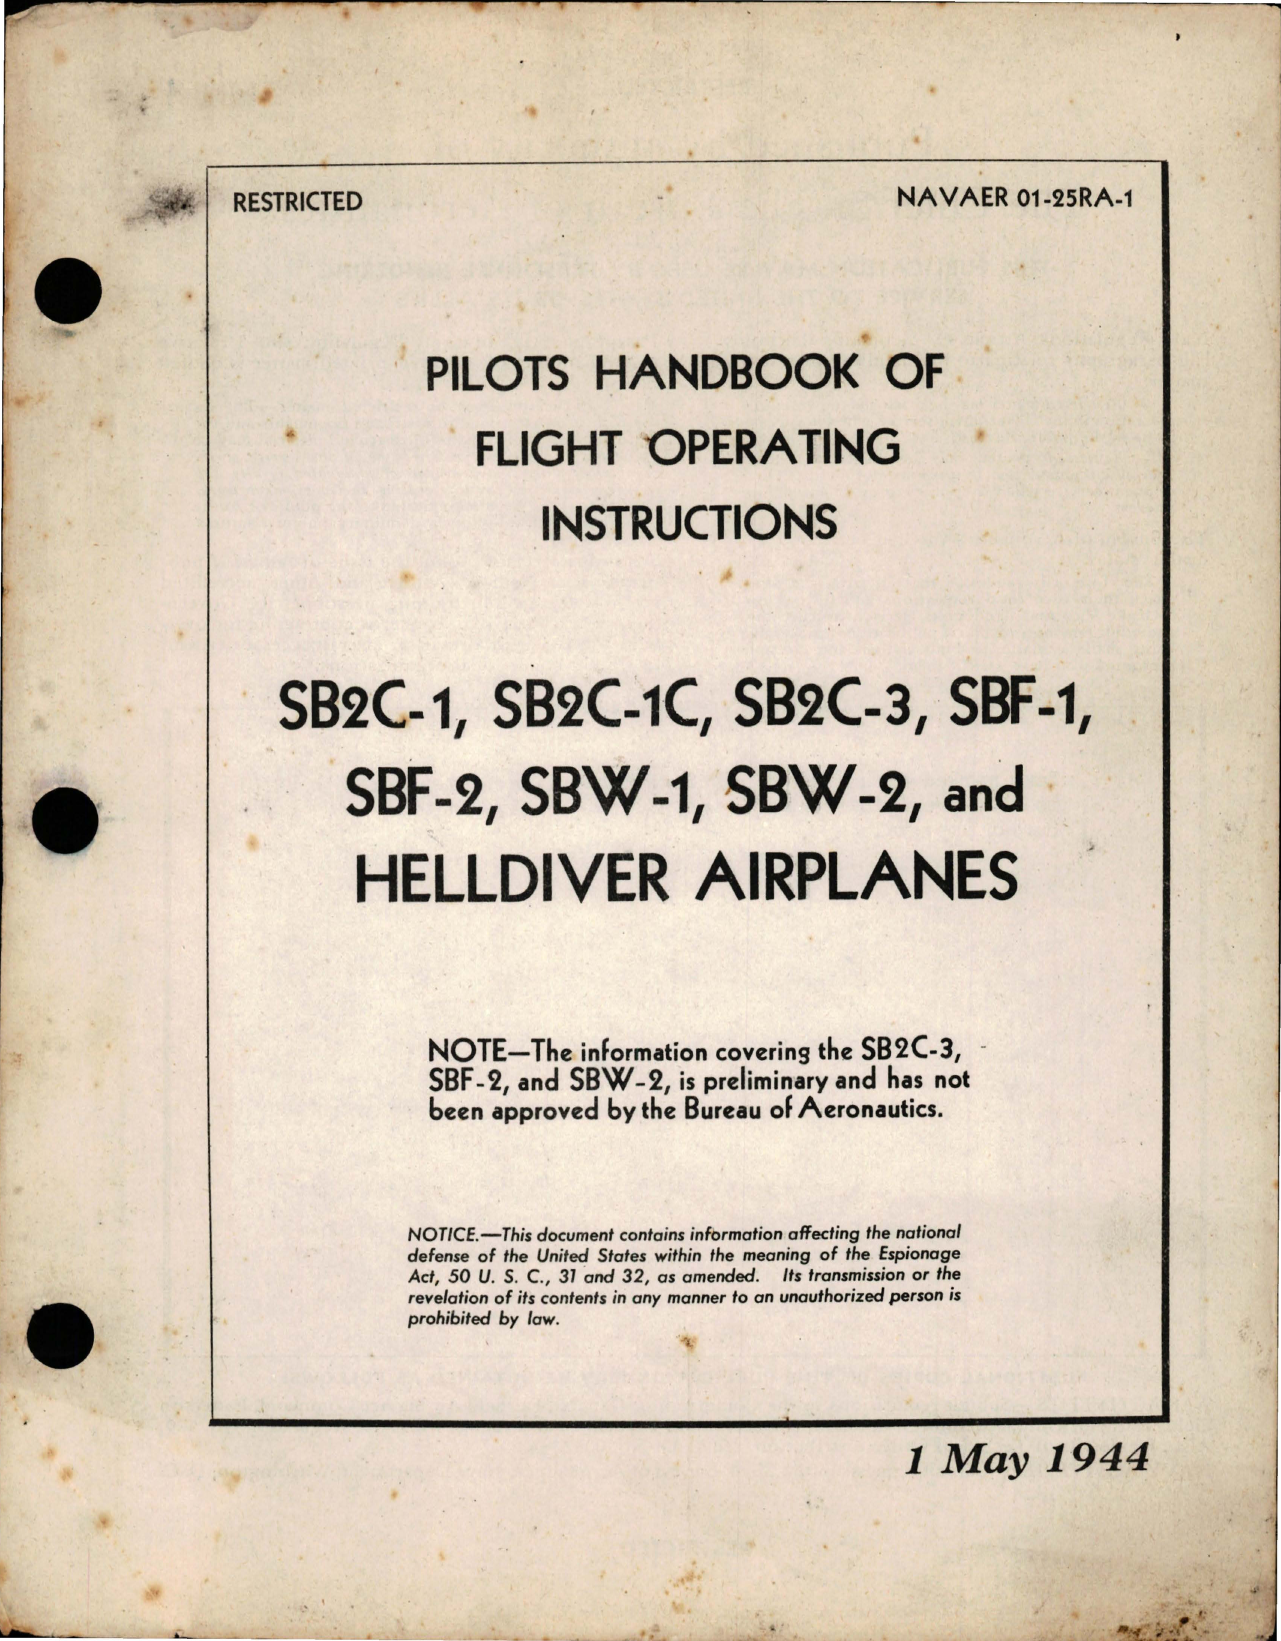 Sample page 1 from AirCorps Library document: Pilot's Handbook of Flight Operating Instructions for SB2C-1, SB2C-1C, SB2C-3, SBF-1, SBF-2, SBW-1, SBW-2 and Helldiver